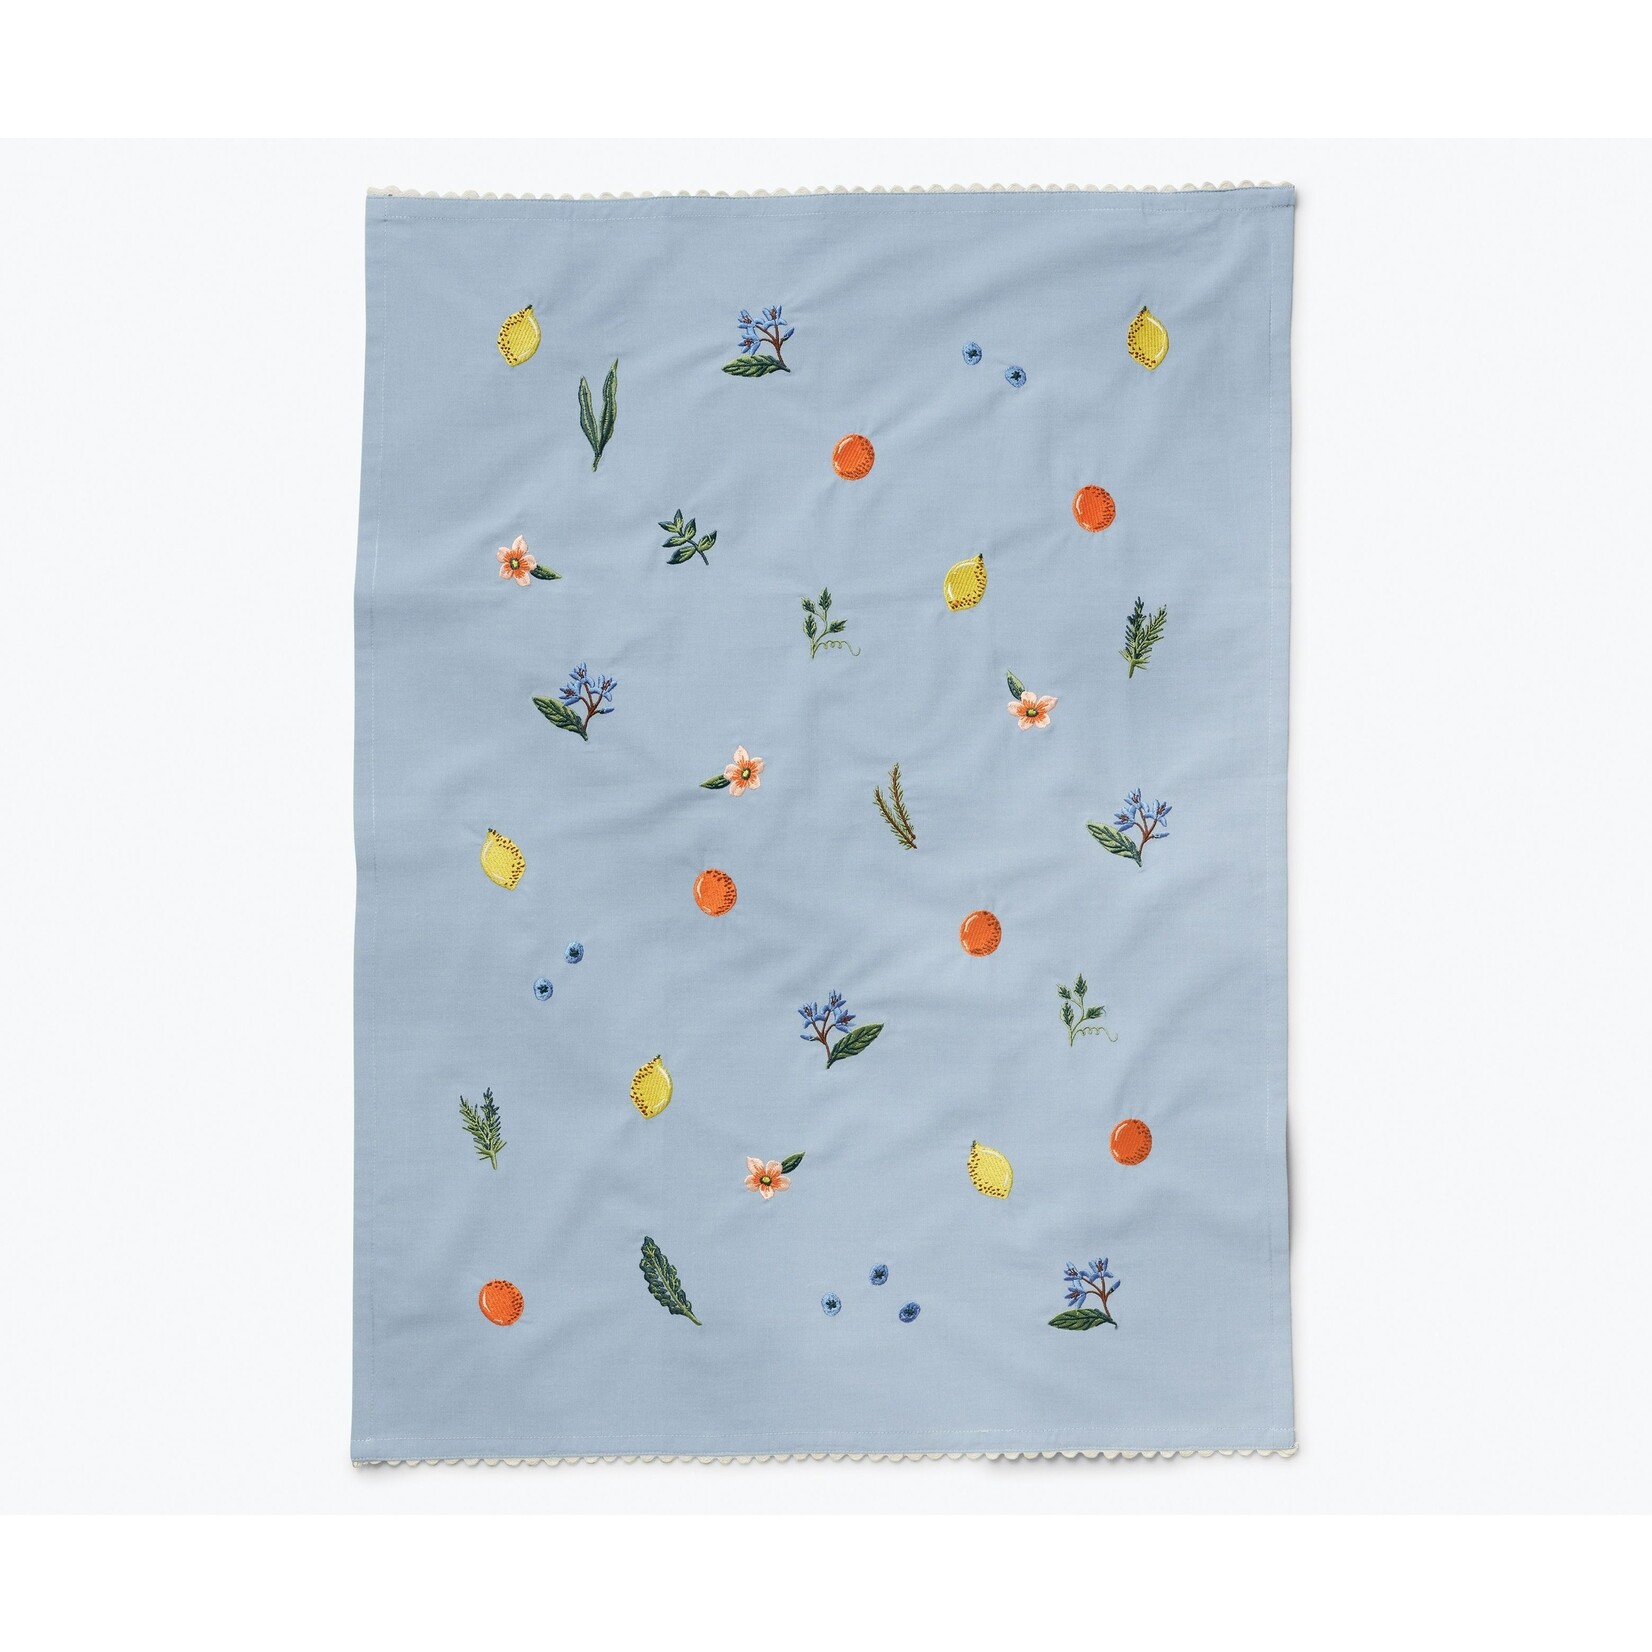 Rifle Paper Co Embroidered Tea Towel